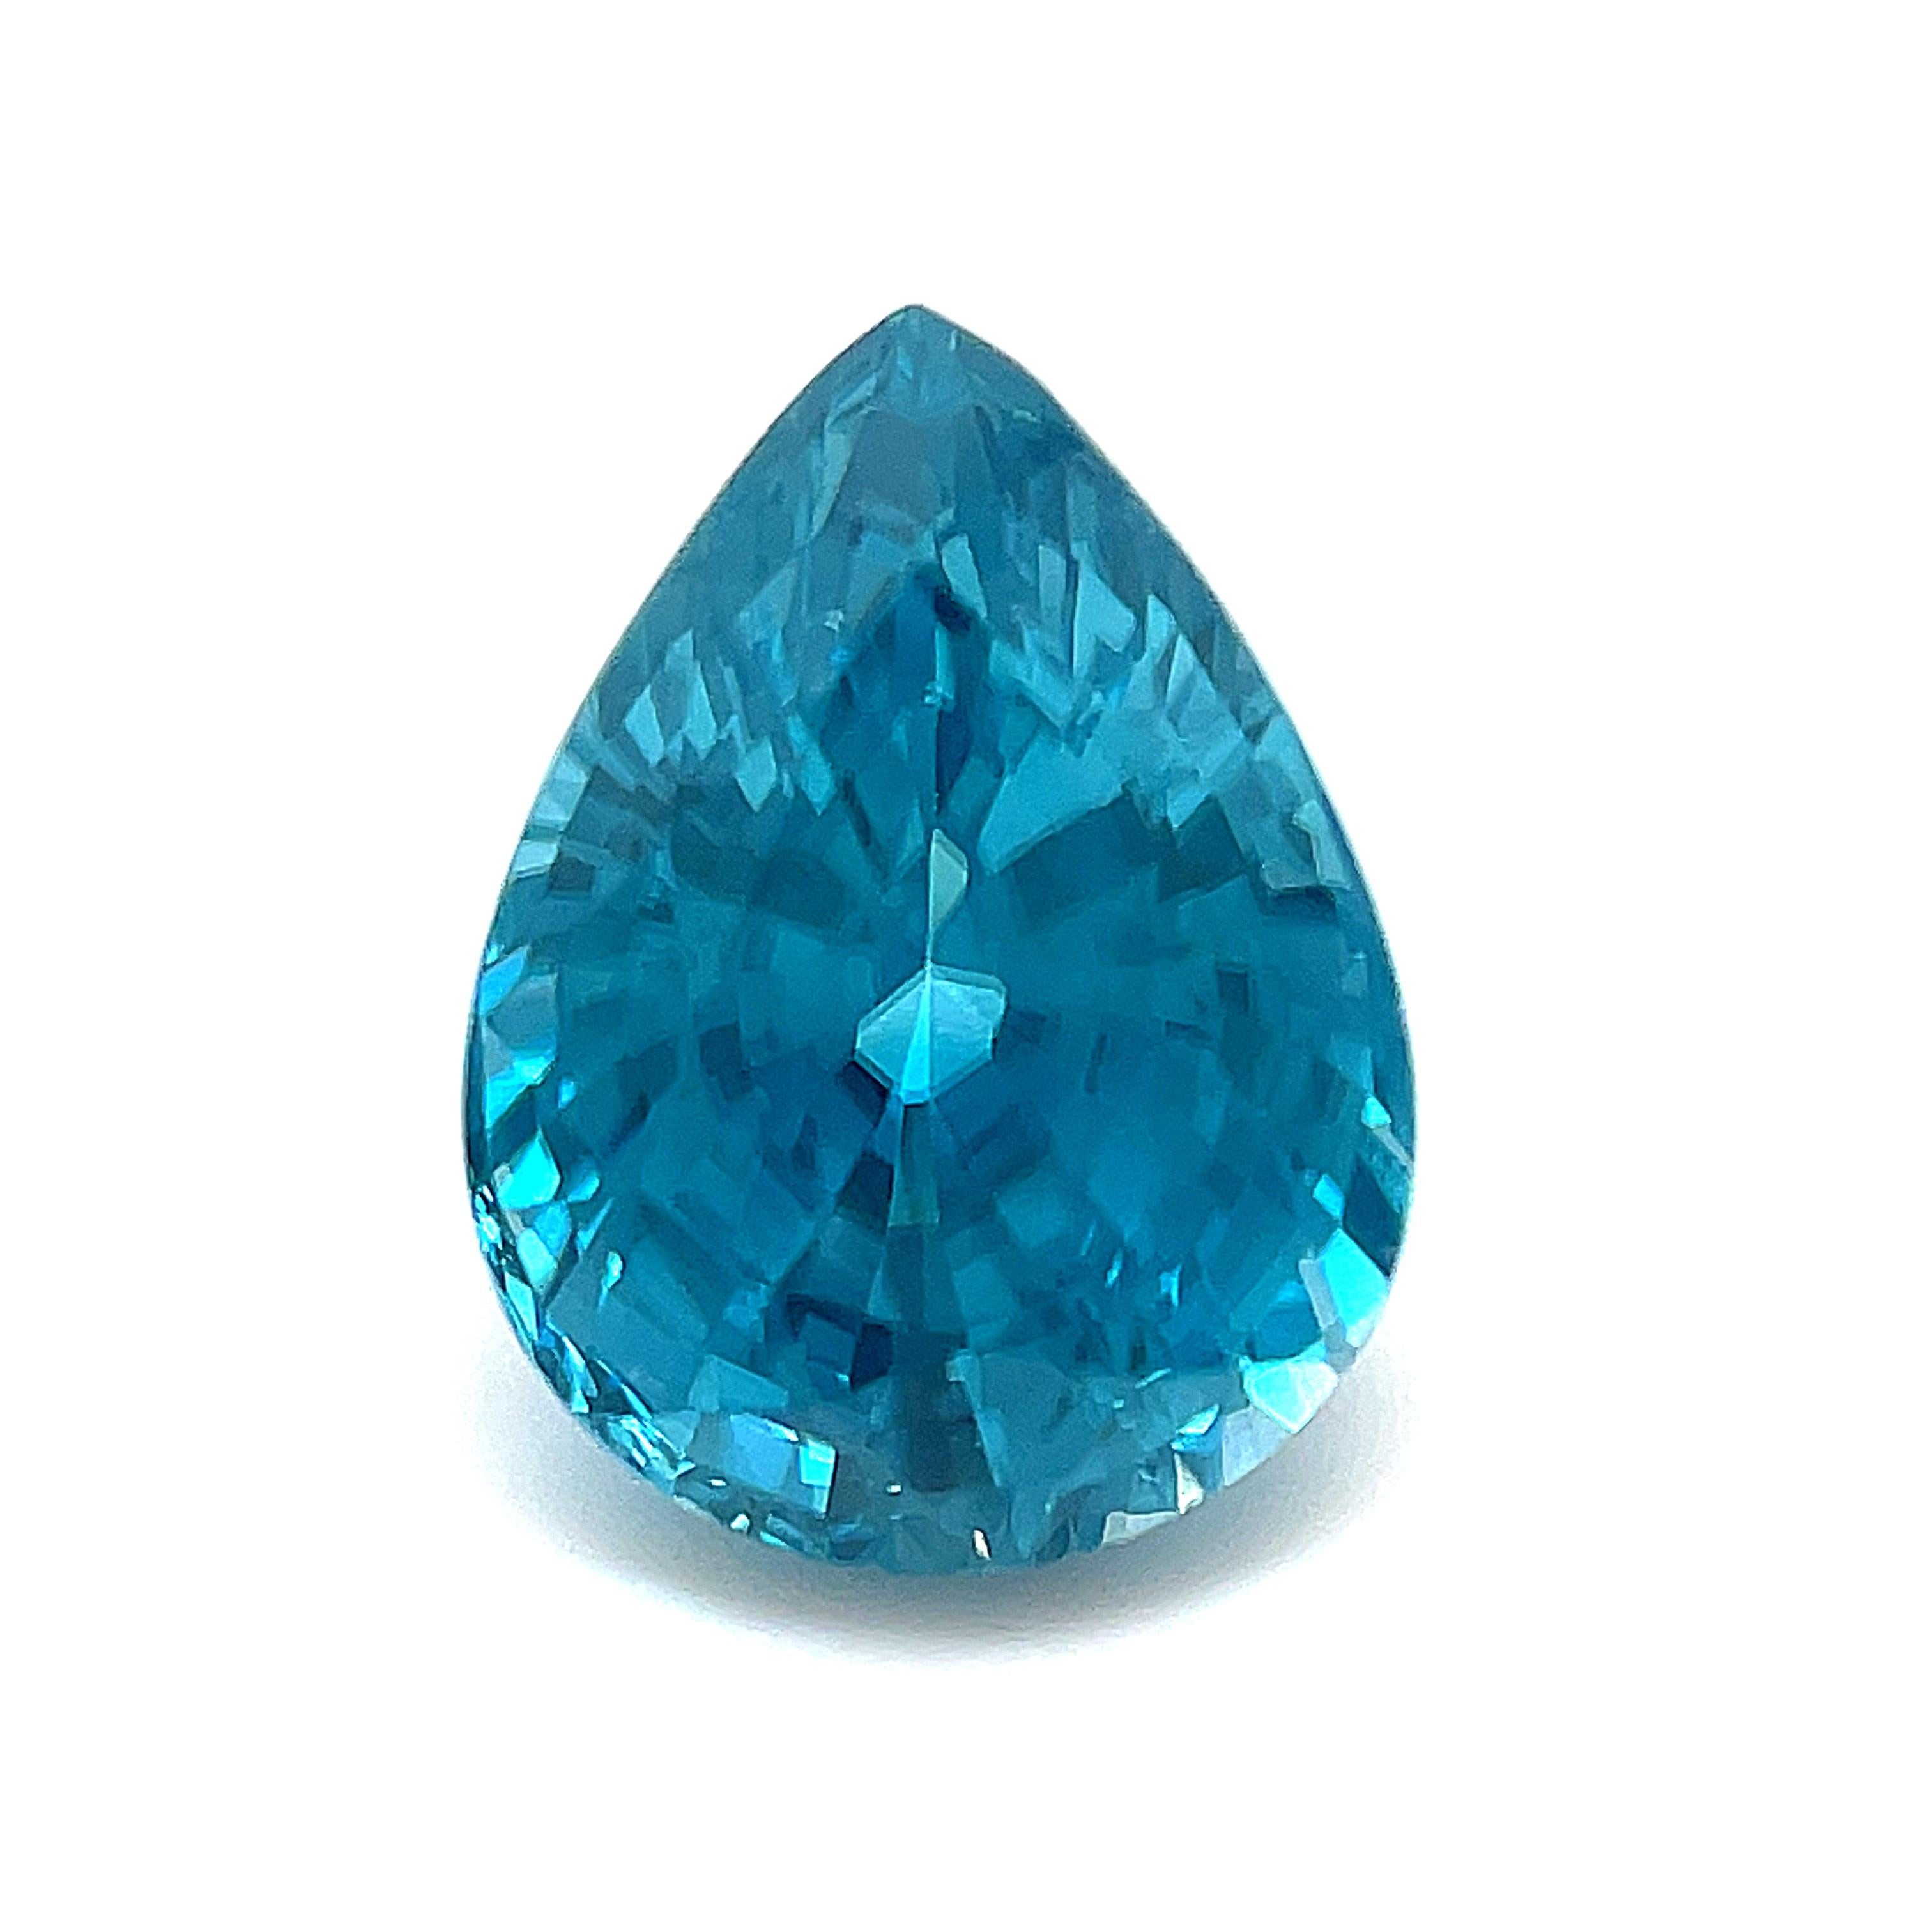 This 4.72 carat blue zircon pear is exceptionally beautiful and will make a stunning custom-made pendant or ring! Zircon is one of the most brilliant, lively natural gemstone varieties. This gem has wonderfully intense 